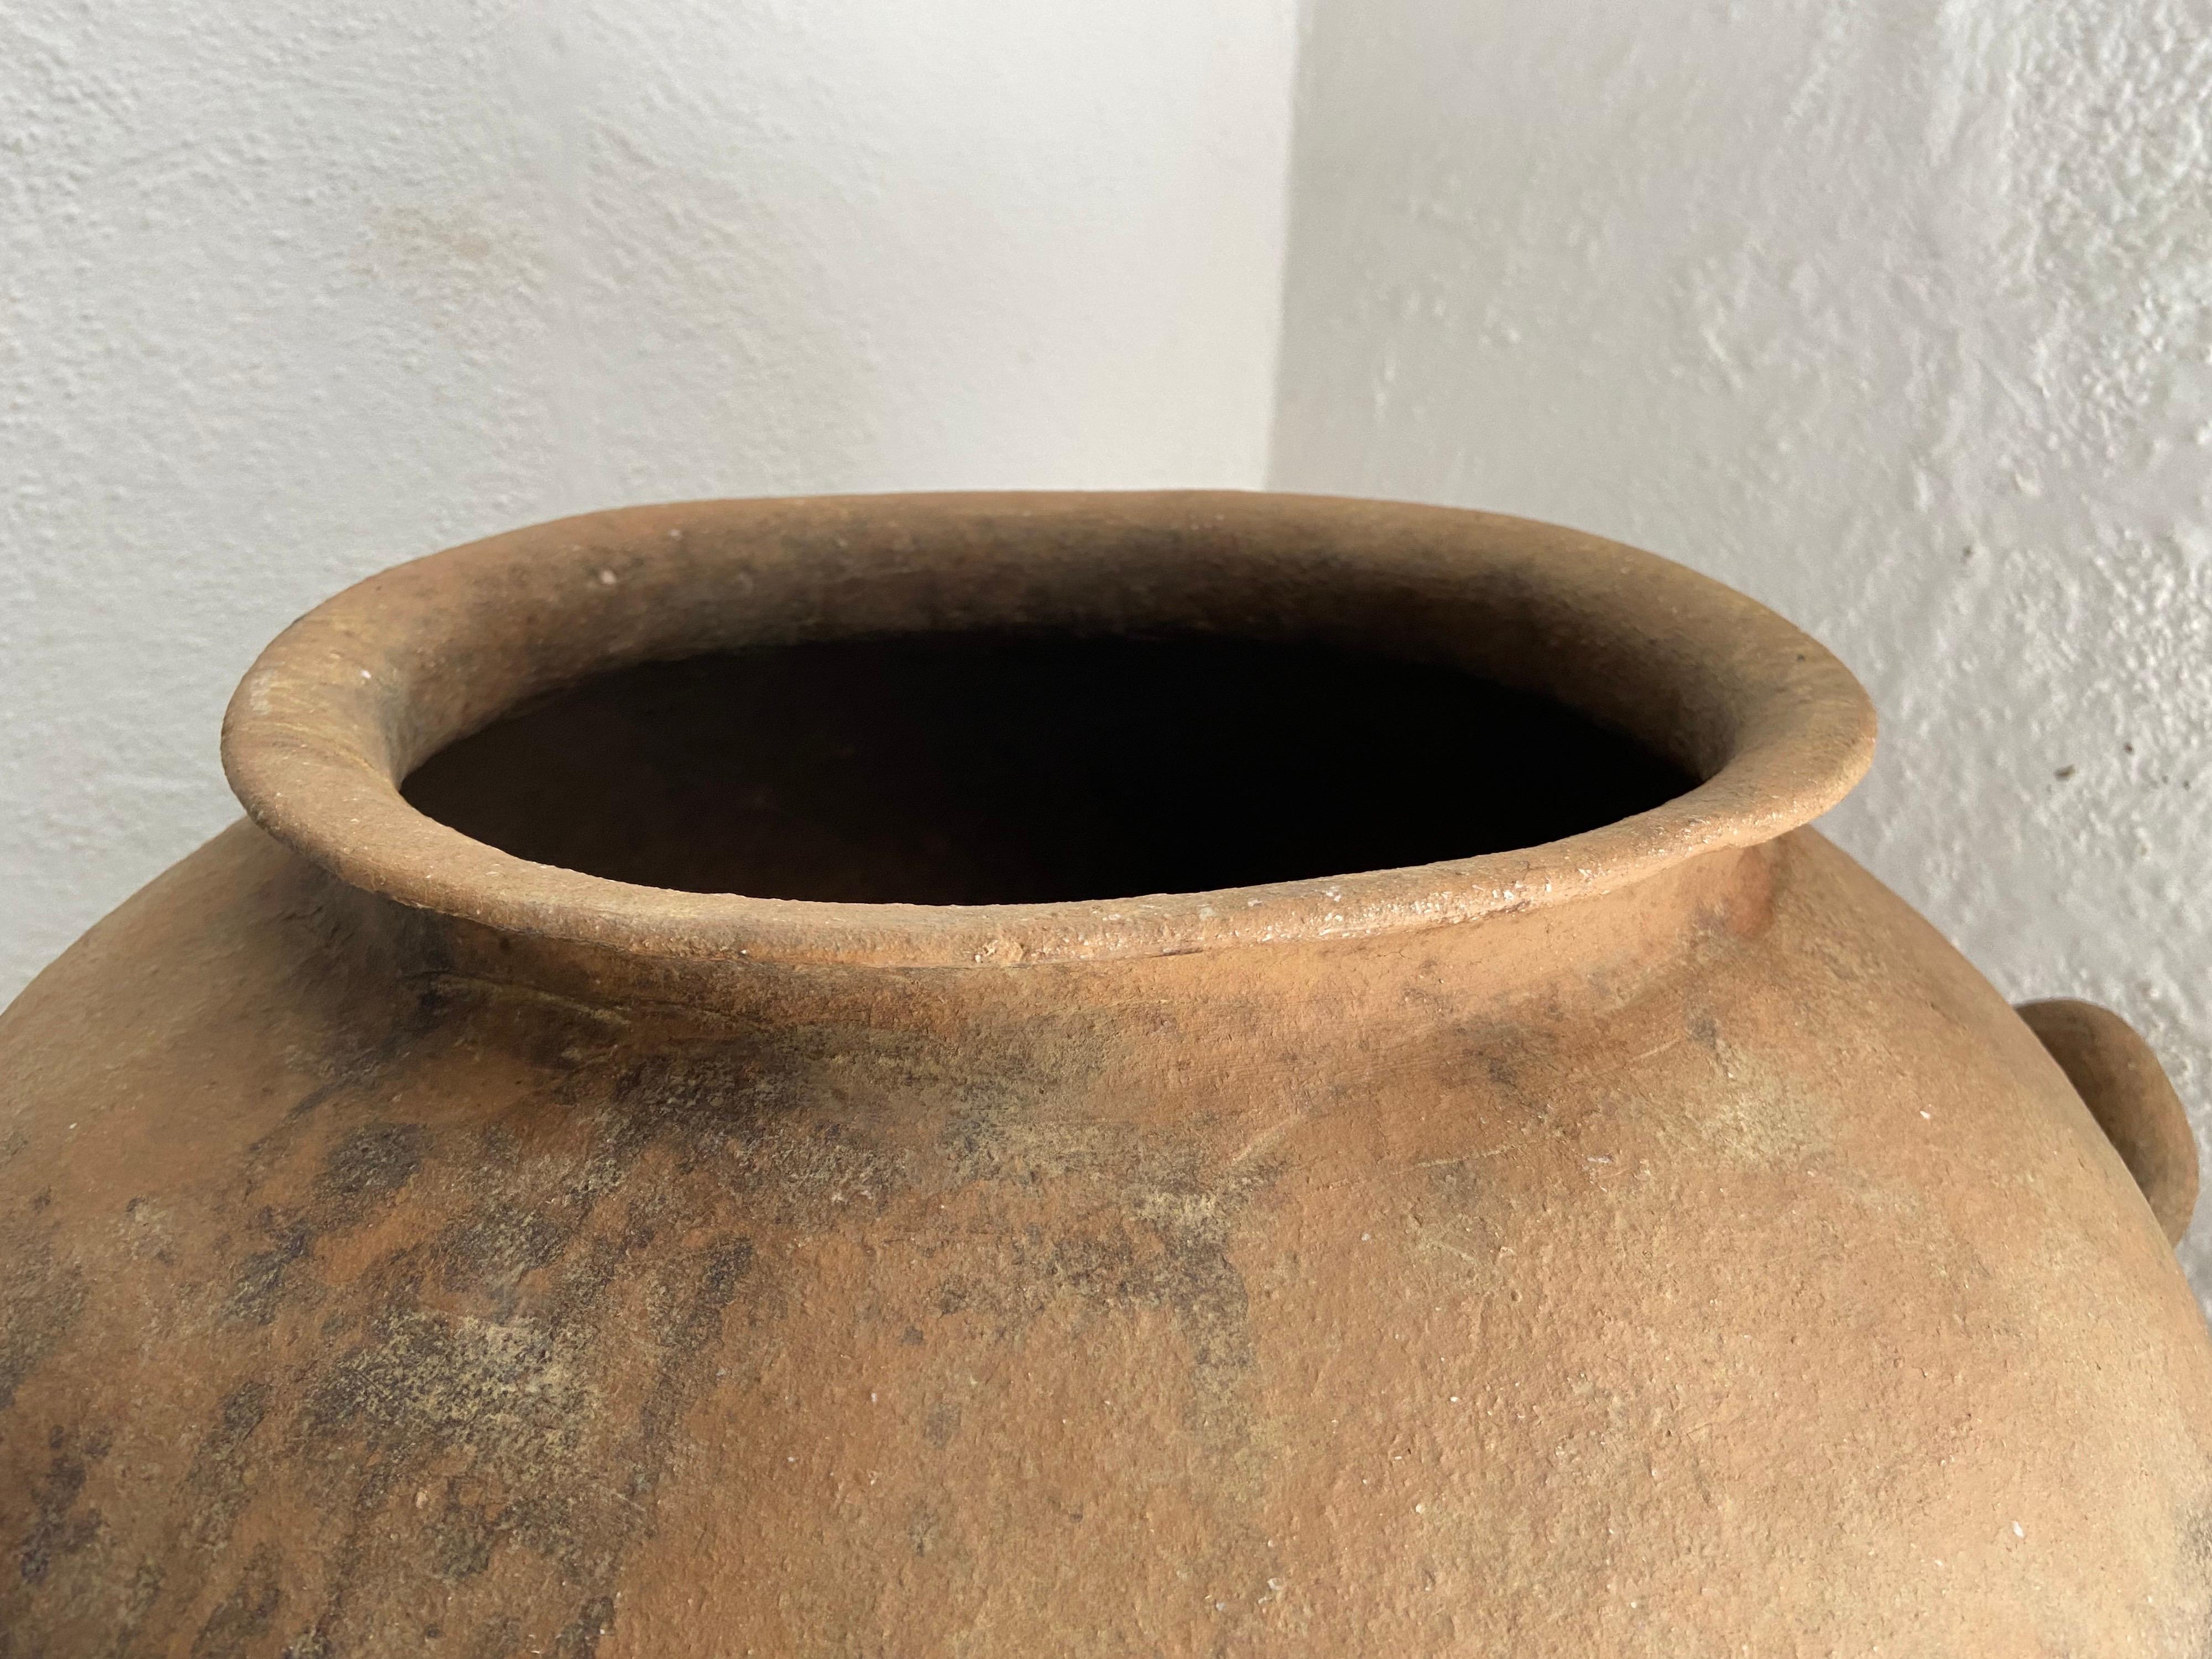 Early 20th century water jar from central Mexico. The pot comes from the indigenous Nahua communities of northern Puebla close to the bordering state of Veracruz. Nahuatl is the principal dialect spoken in these areas.